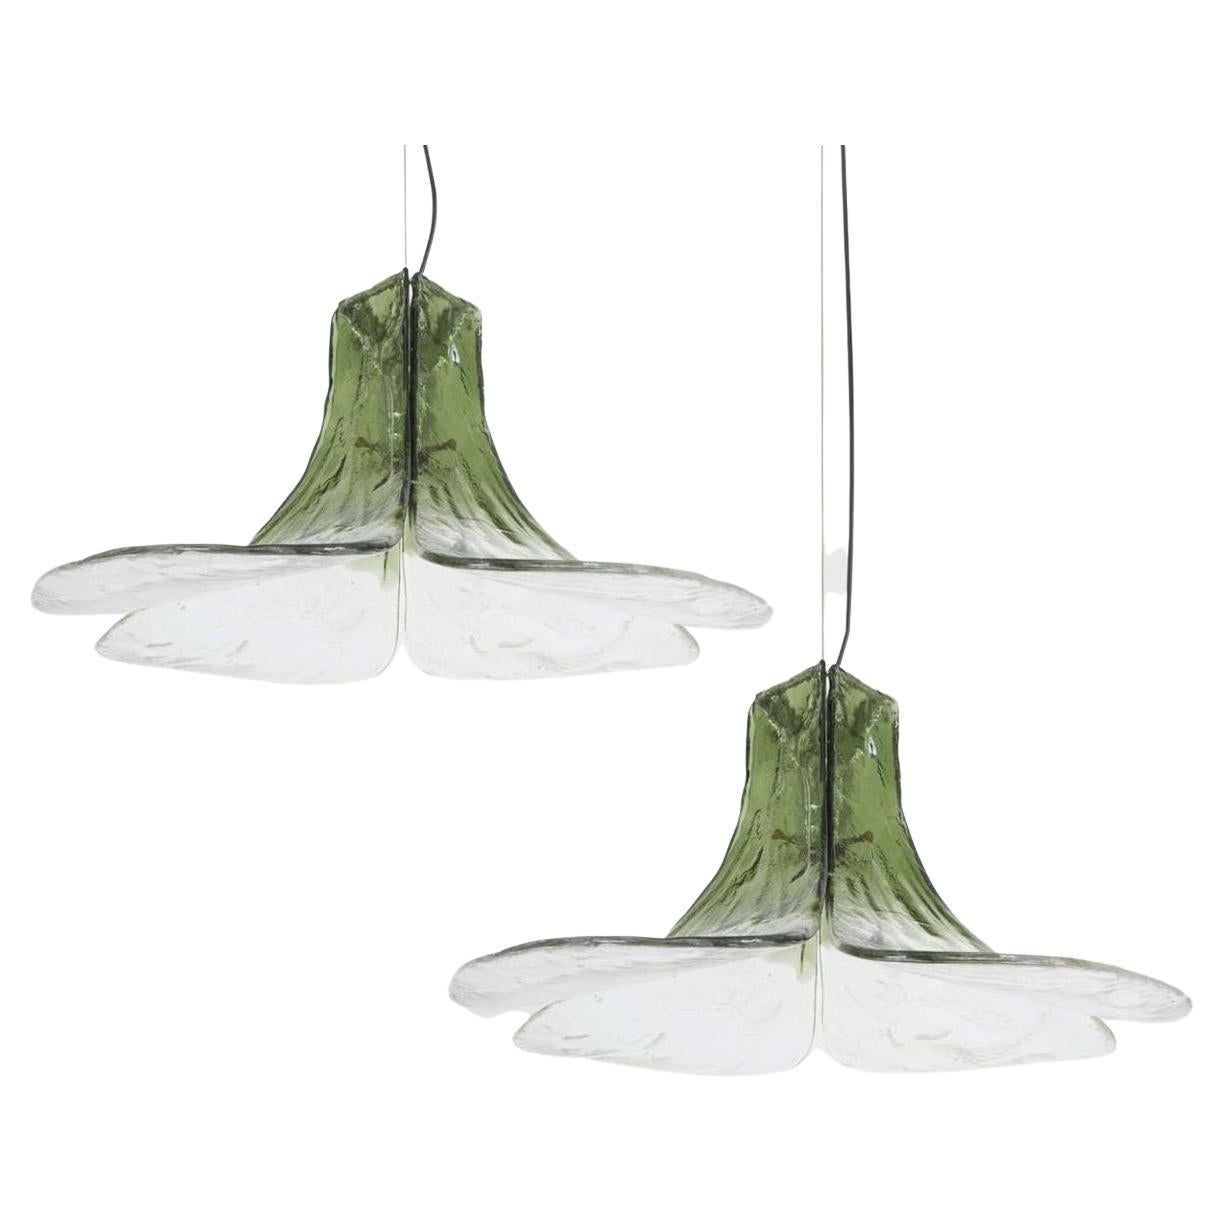 1 of the 2 Pendant Lamps Model Ls185 by Carlo Nason for Mazzega